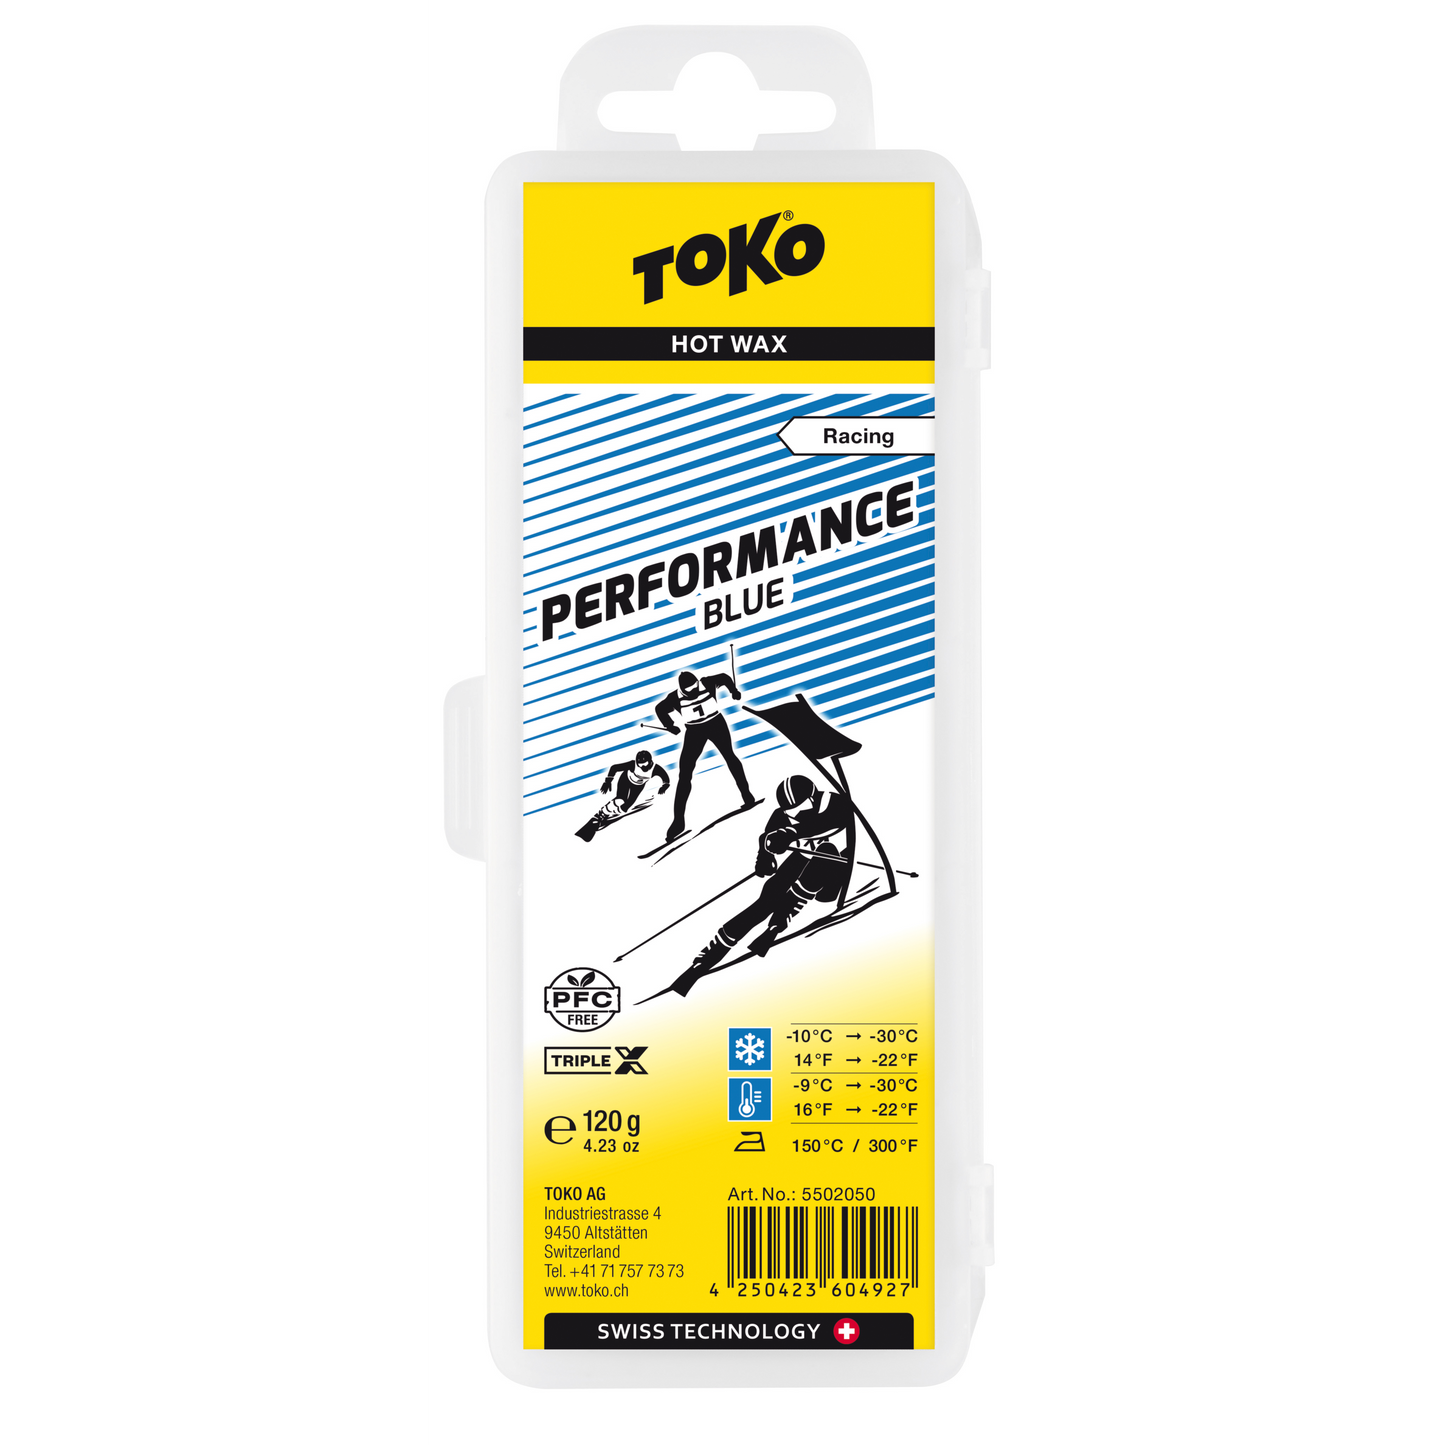 A product picture of the Toko Performance Blue Paraffin Melt Wax